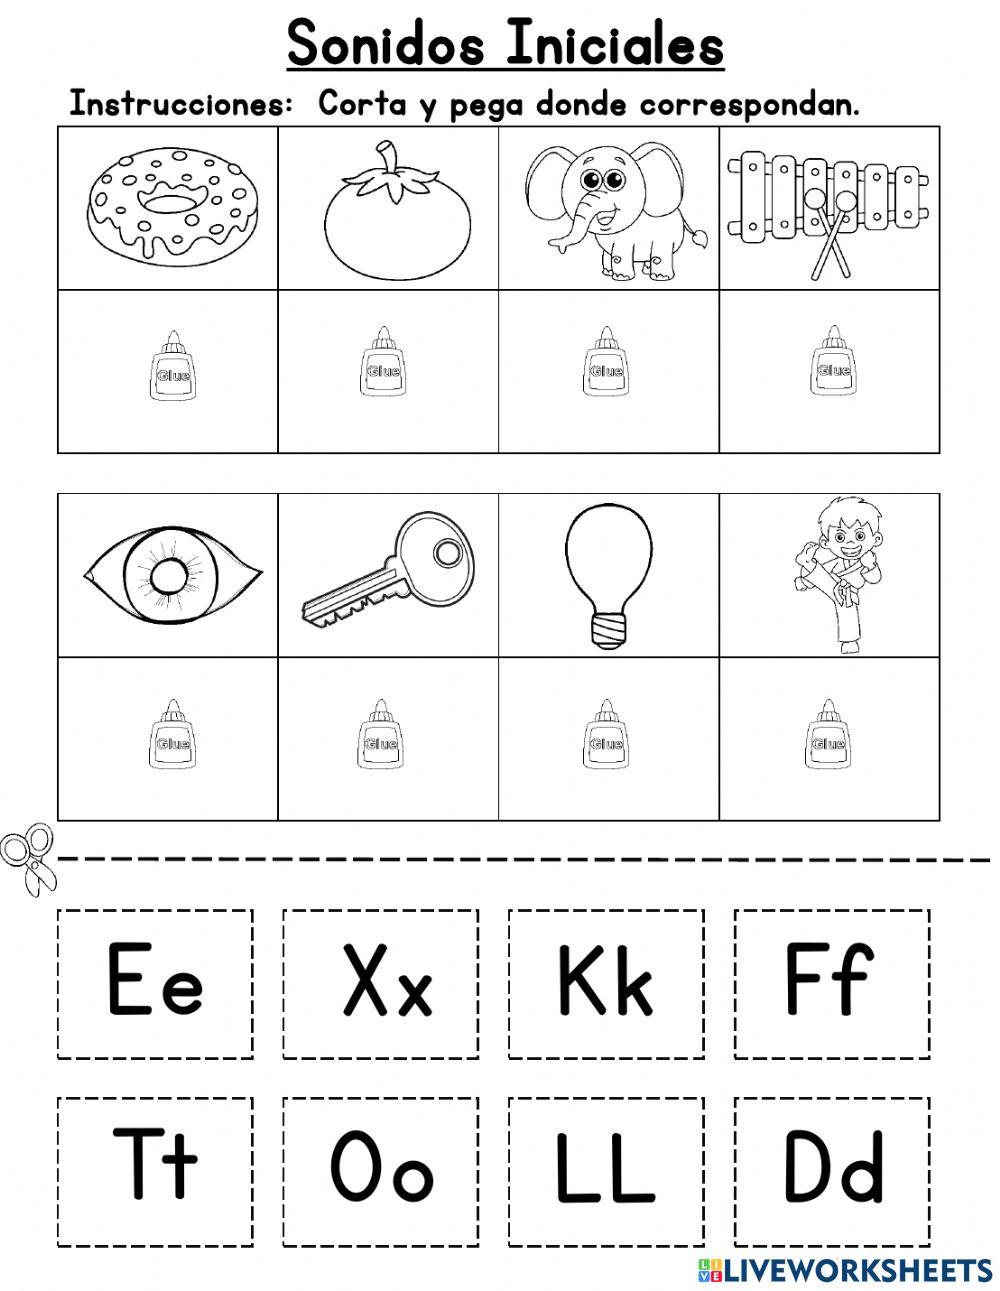 Sonidos iniciales online exercise for live worksheets